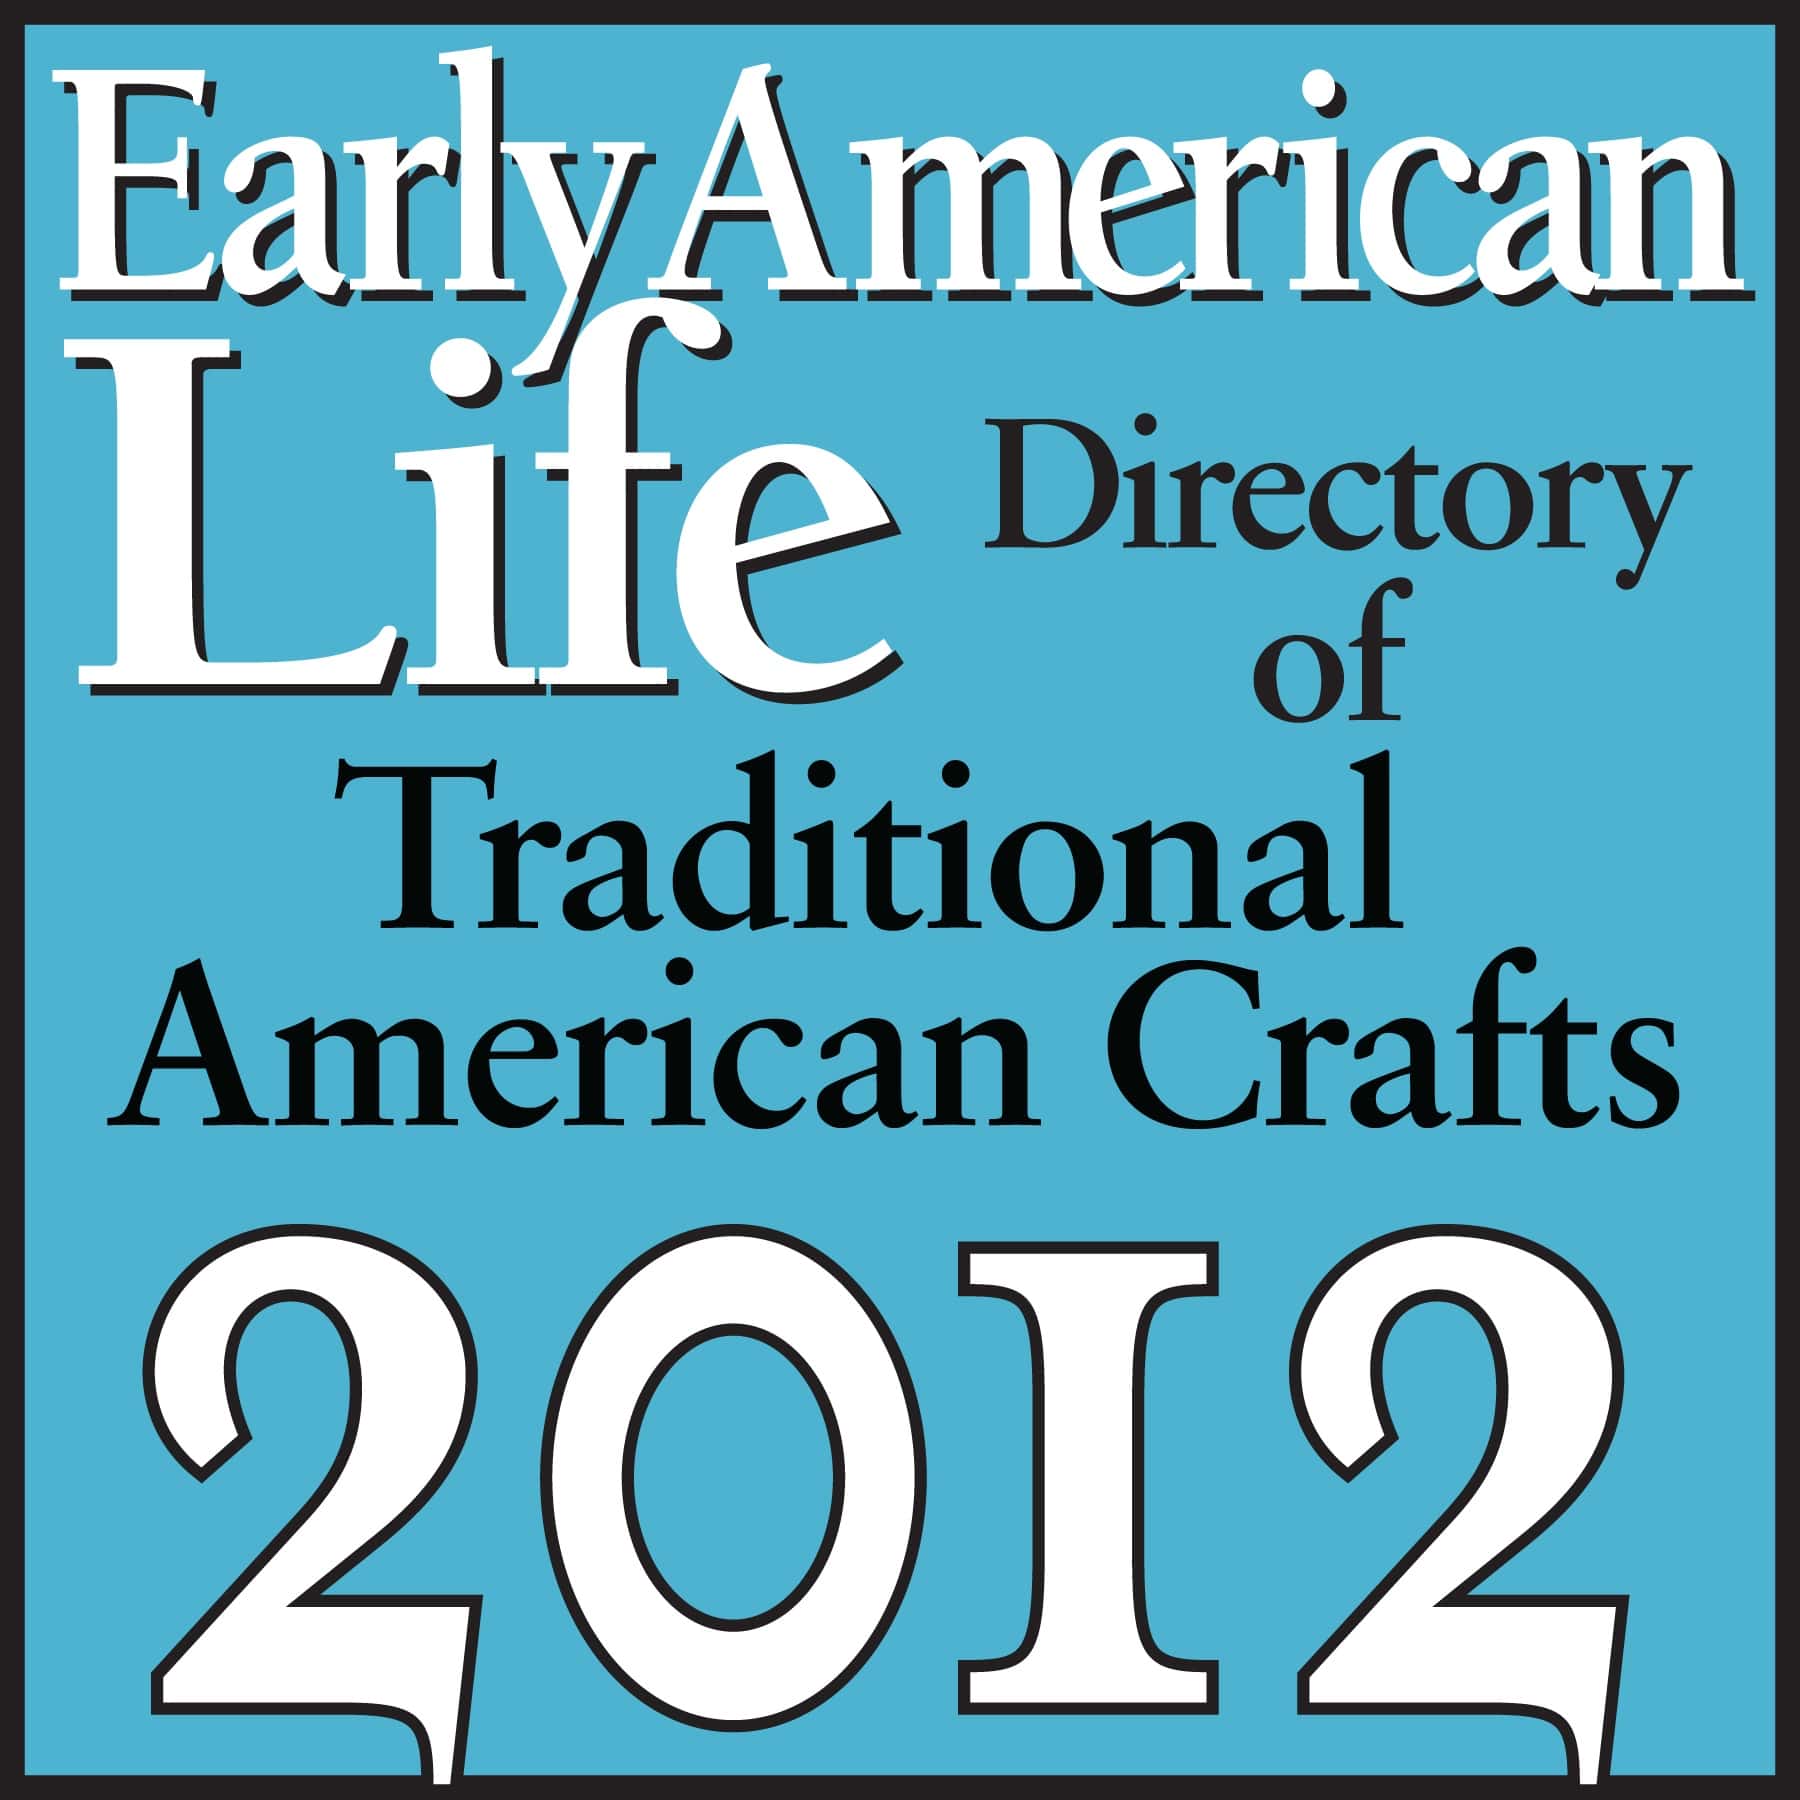 Early American Life Traditional American Crafts logo 2012